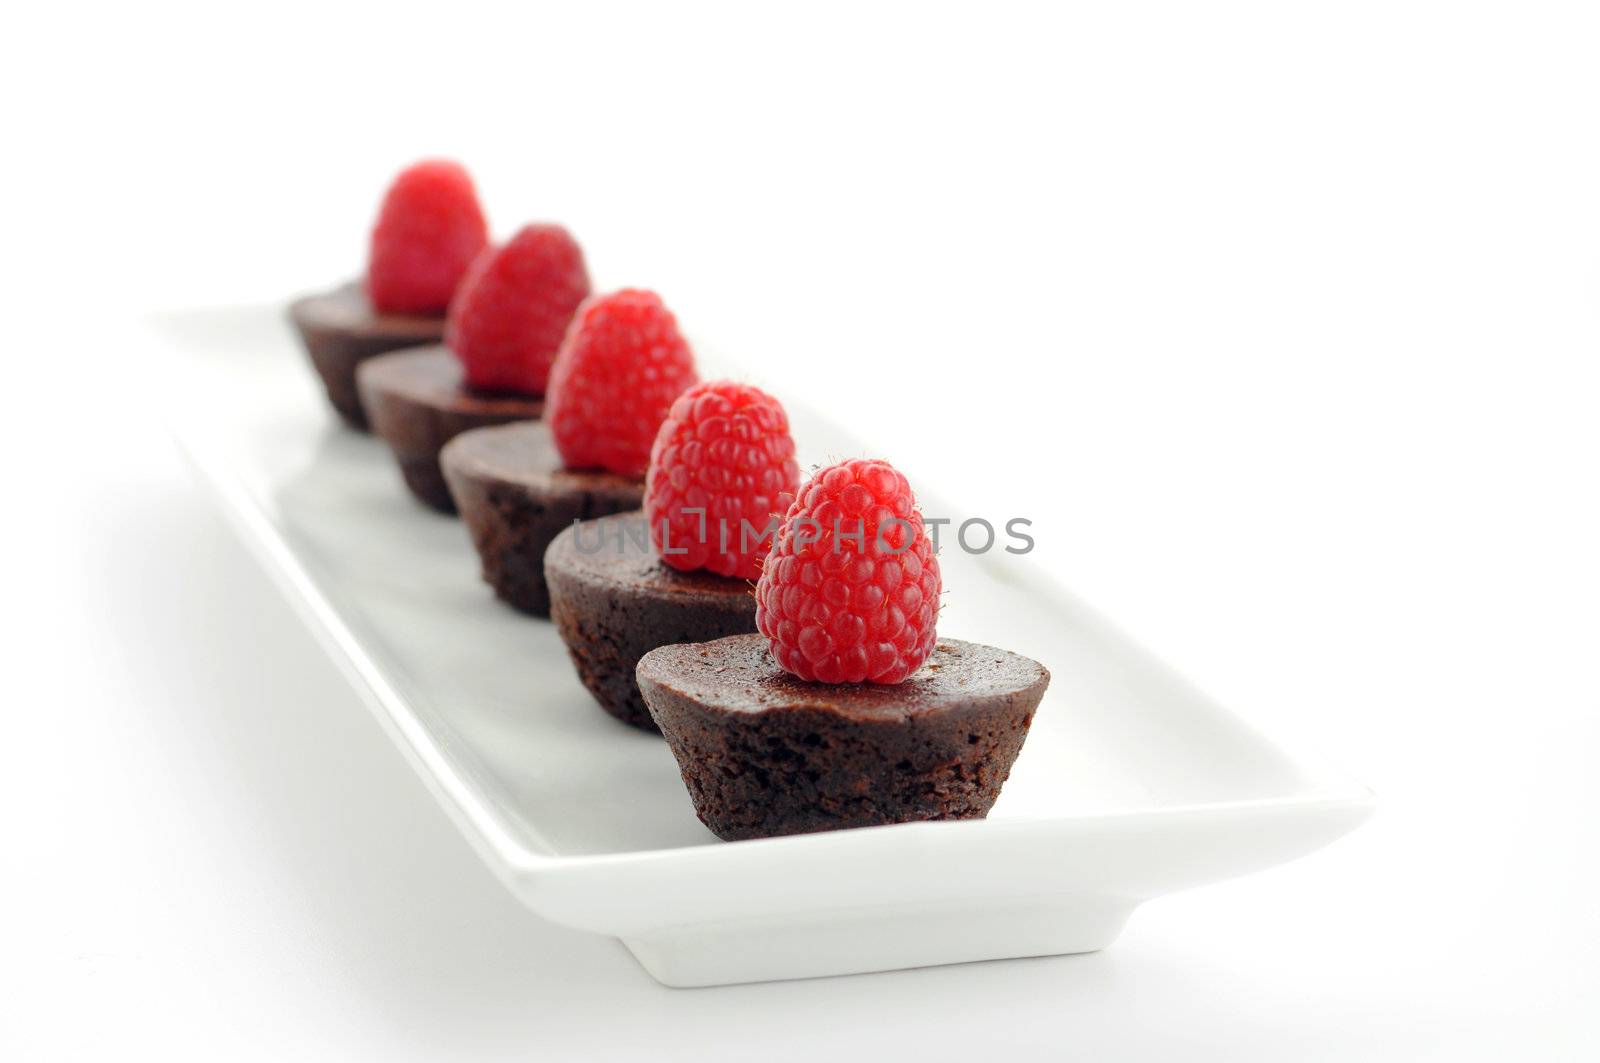 Brownies by billberryphotography